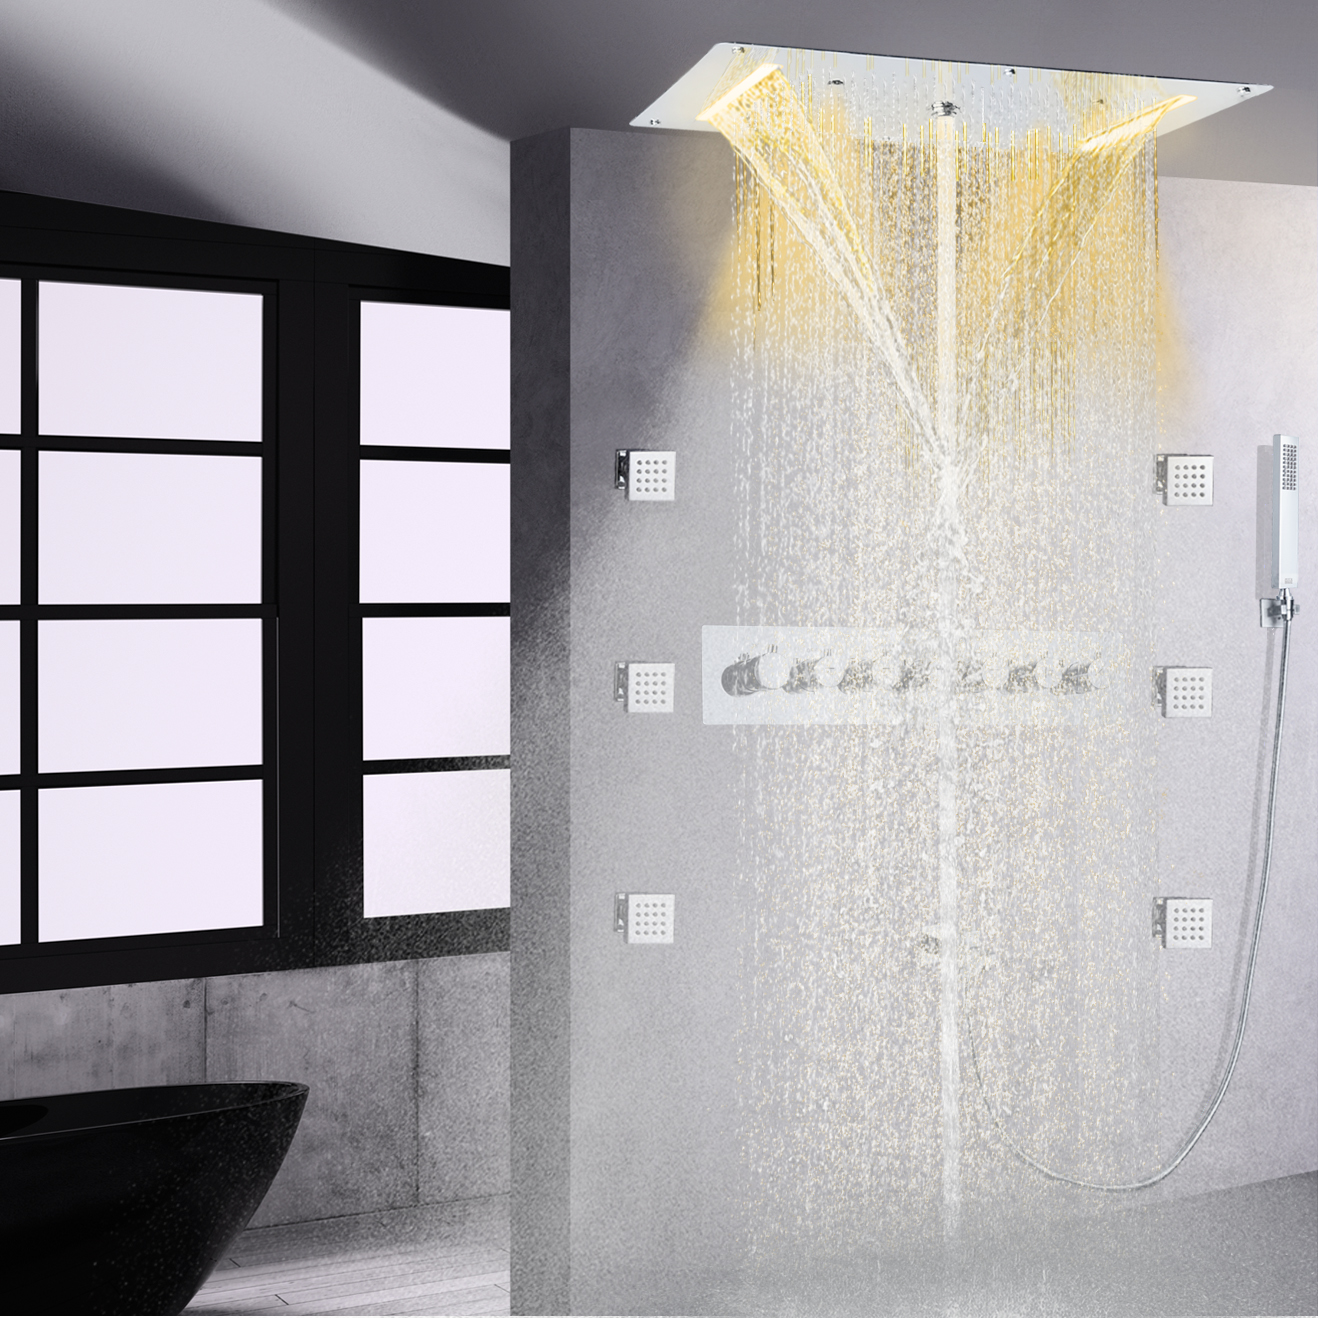 Chrome Polished LED Concealed Ceiling Waterfall Shower Mixer Bathroom Thermostatic Mist Rain Spa